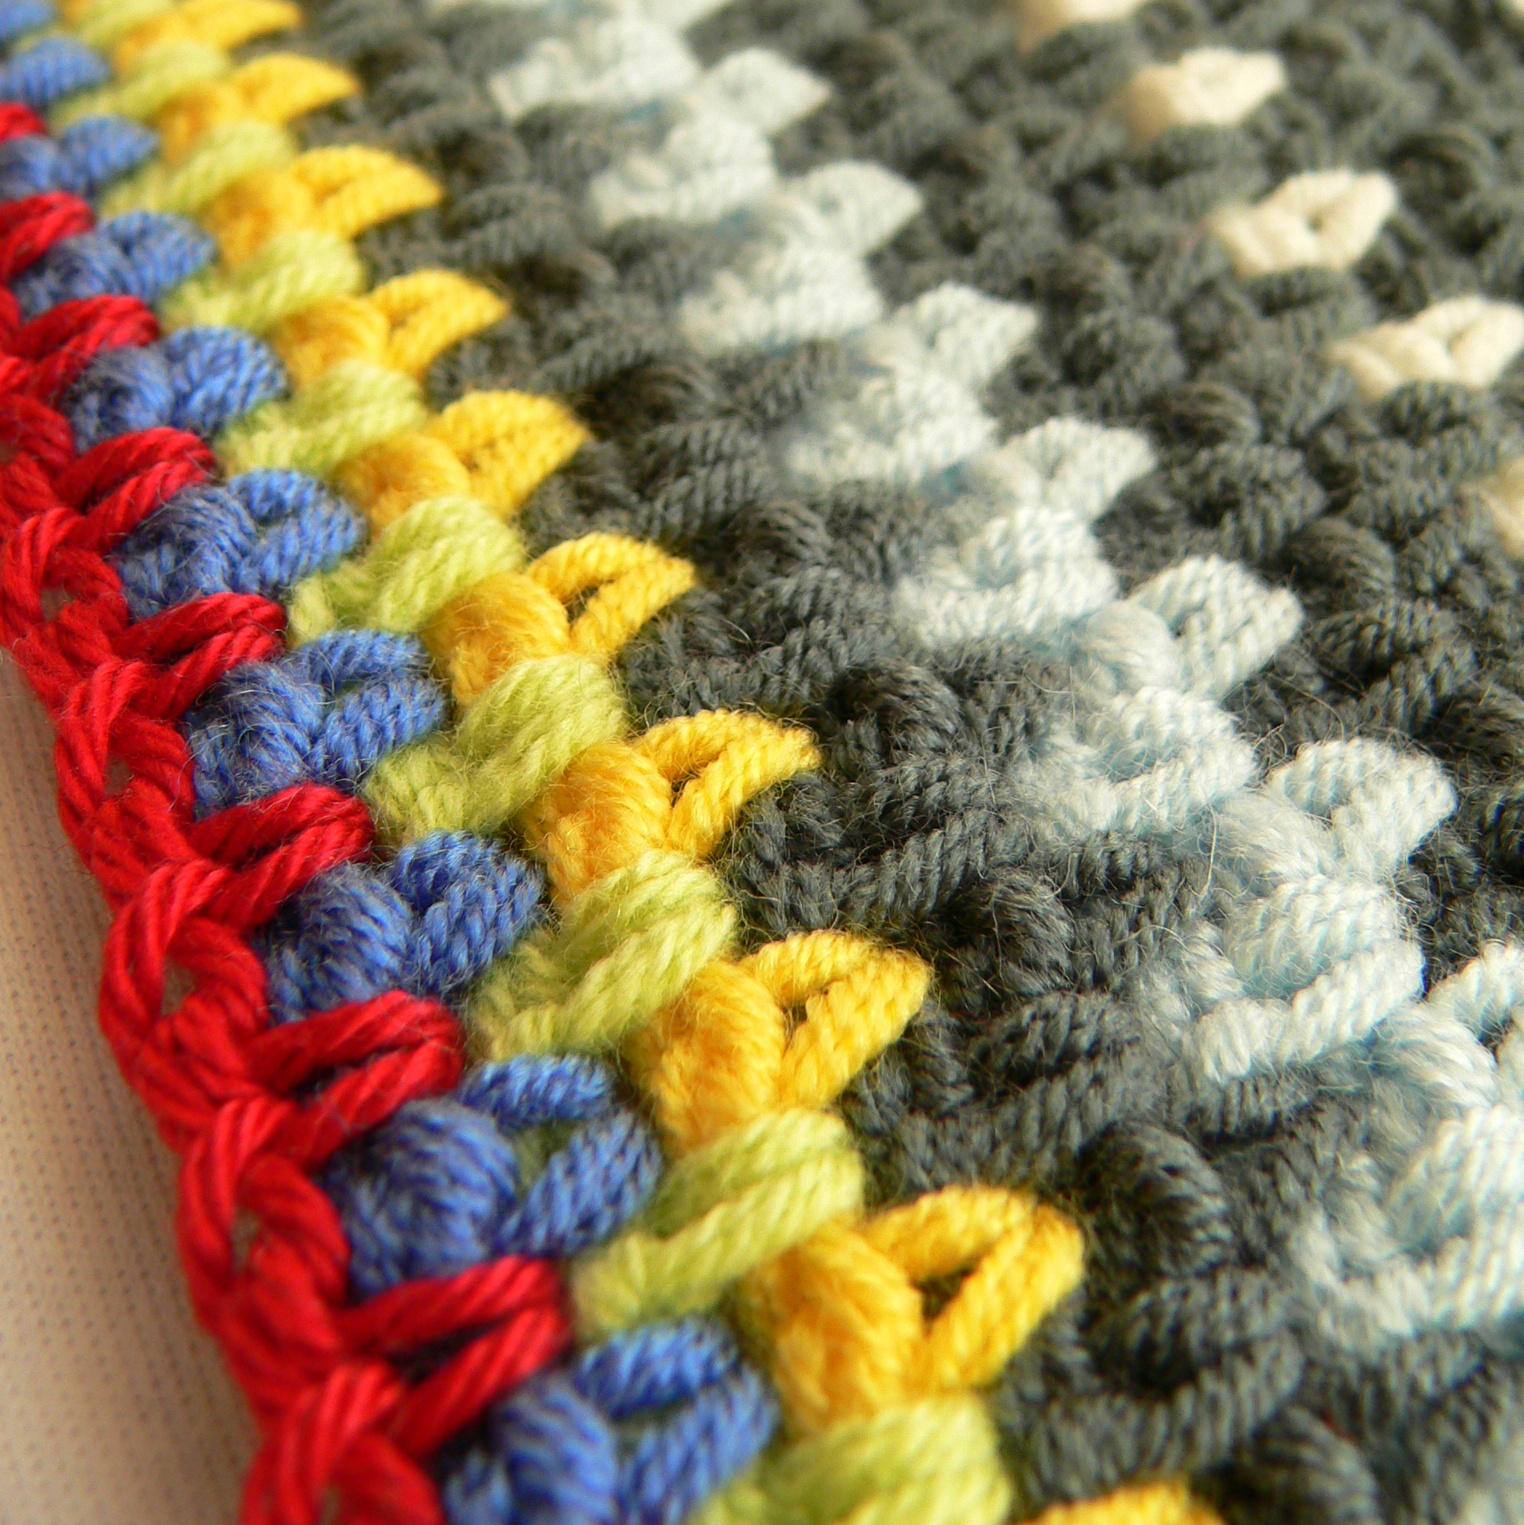 The linen stitch is an easy, textured stitch